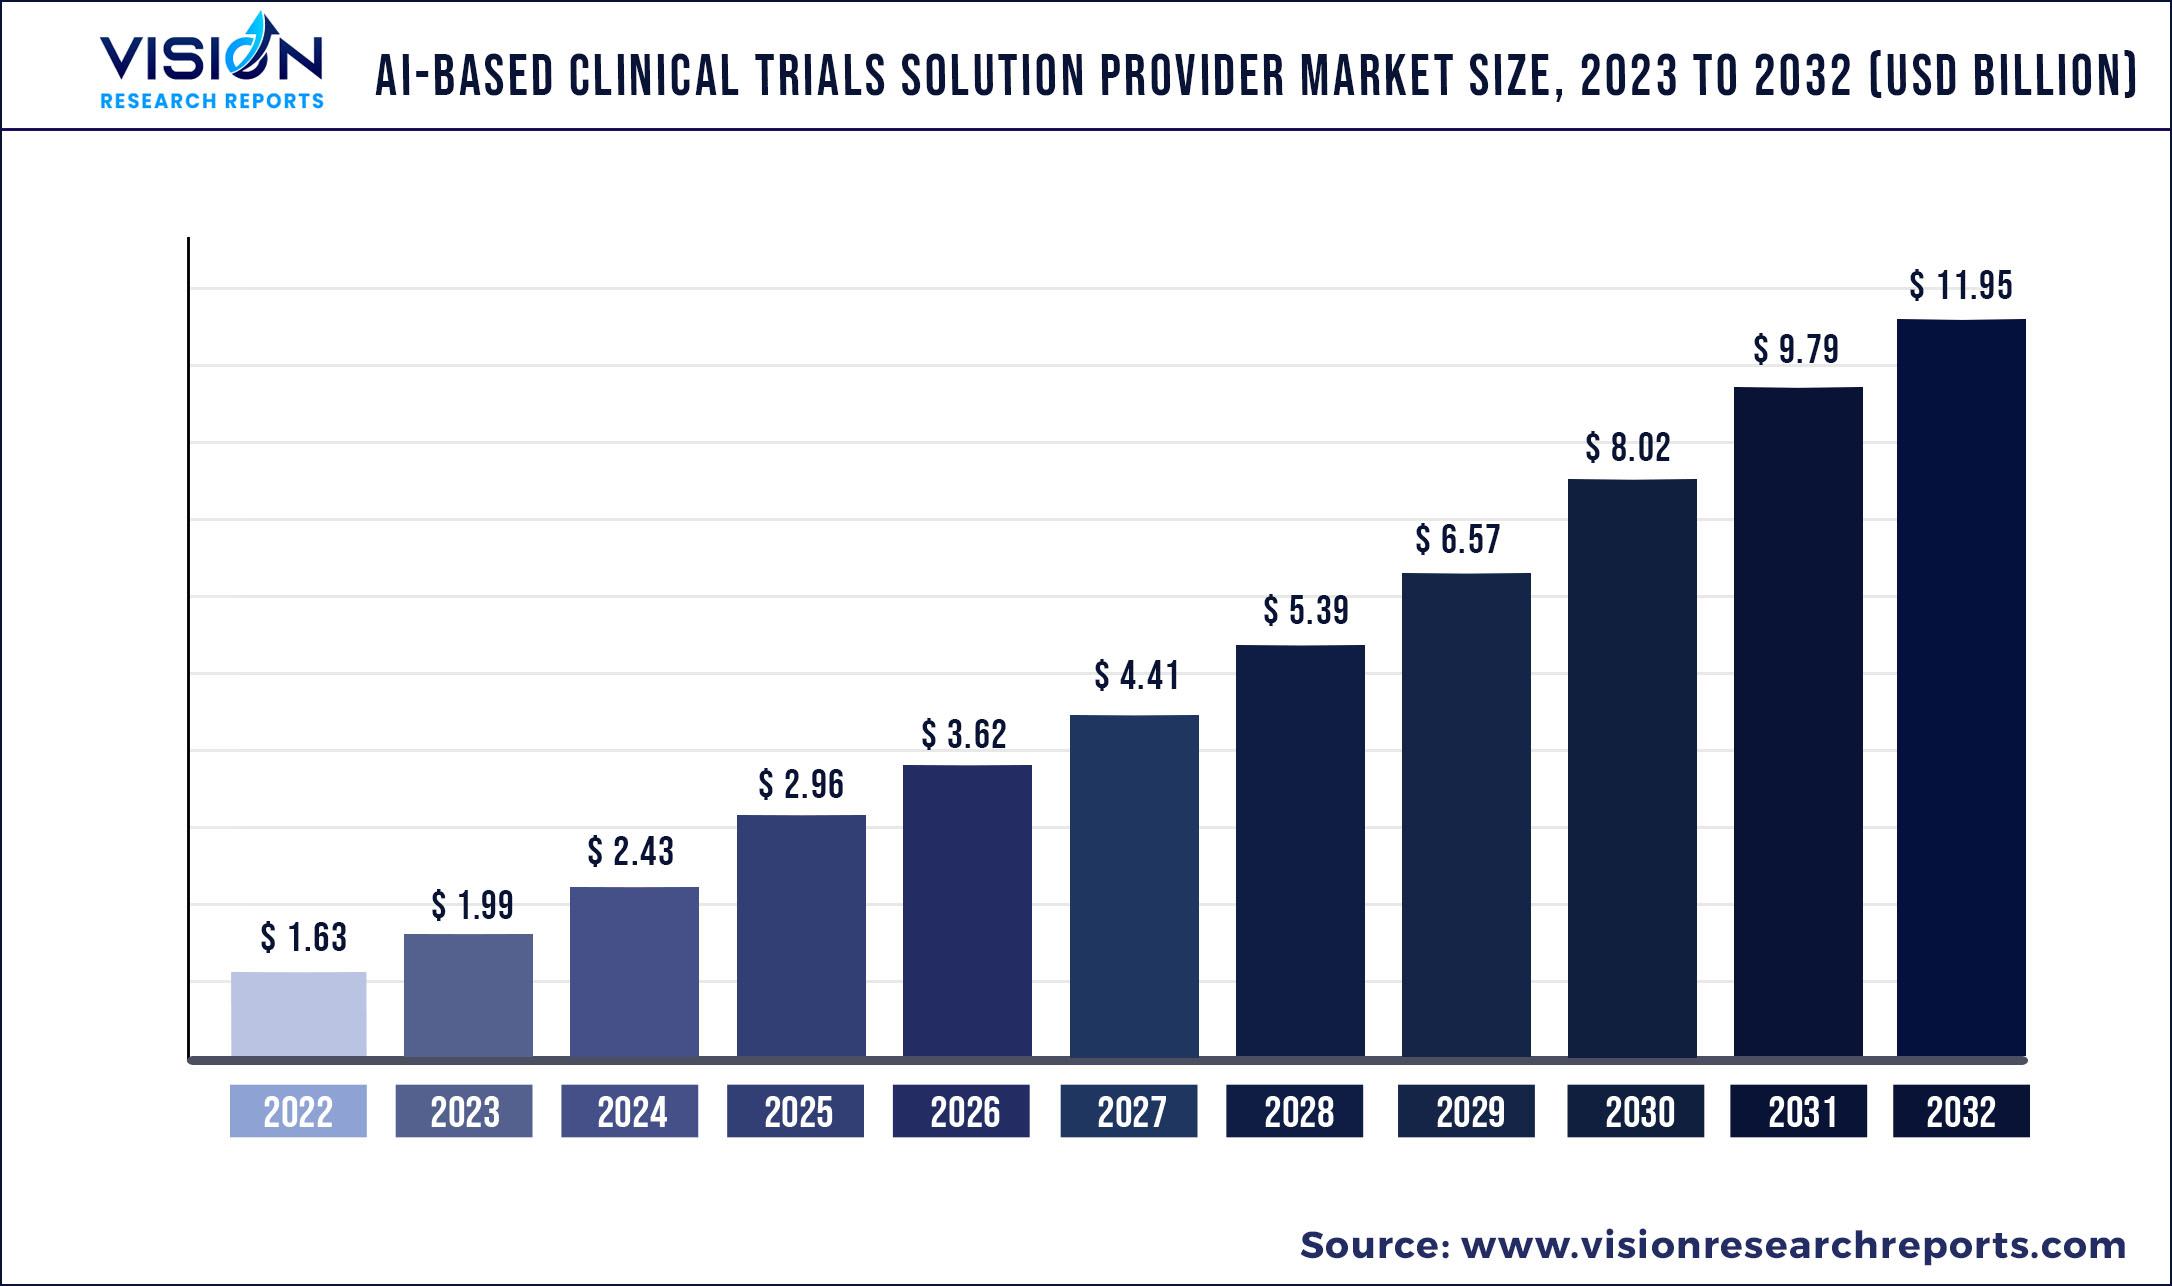 AI-based Clinical Trials Solution Provider Market Size 2023 to 2032